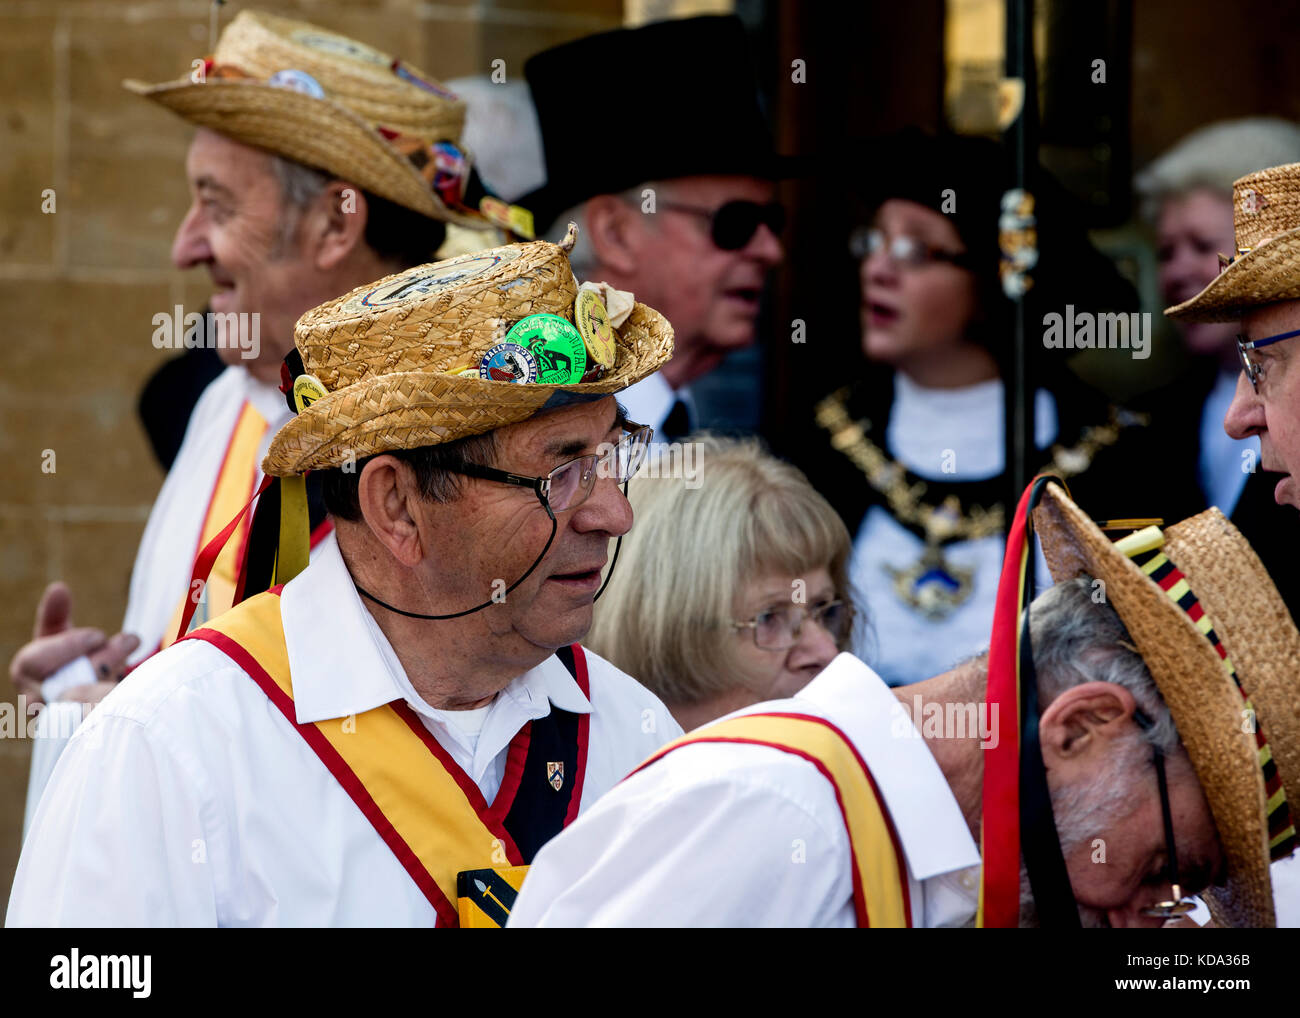 Stratford-upon-Avon, Warwickshire, England, UK. 12th October 2017. members of  Shakespeare Morris and council officials assemble for the opening of the traditional annual mop fair in Stratford-upon-Avon. Mop fairs date back to the time of King Edward III as hiring fairs for labour. Credit: Colin Underhill/Alamy Live News Stock Photo